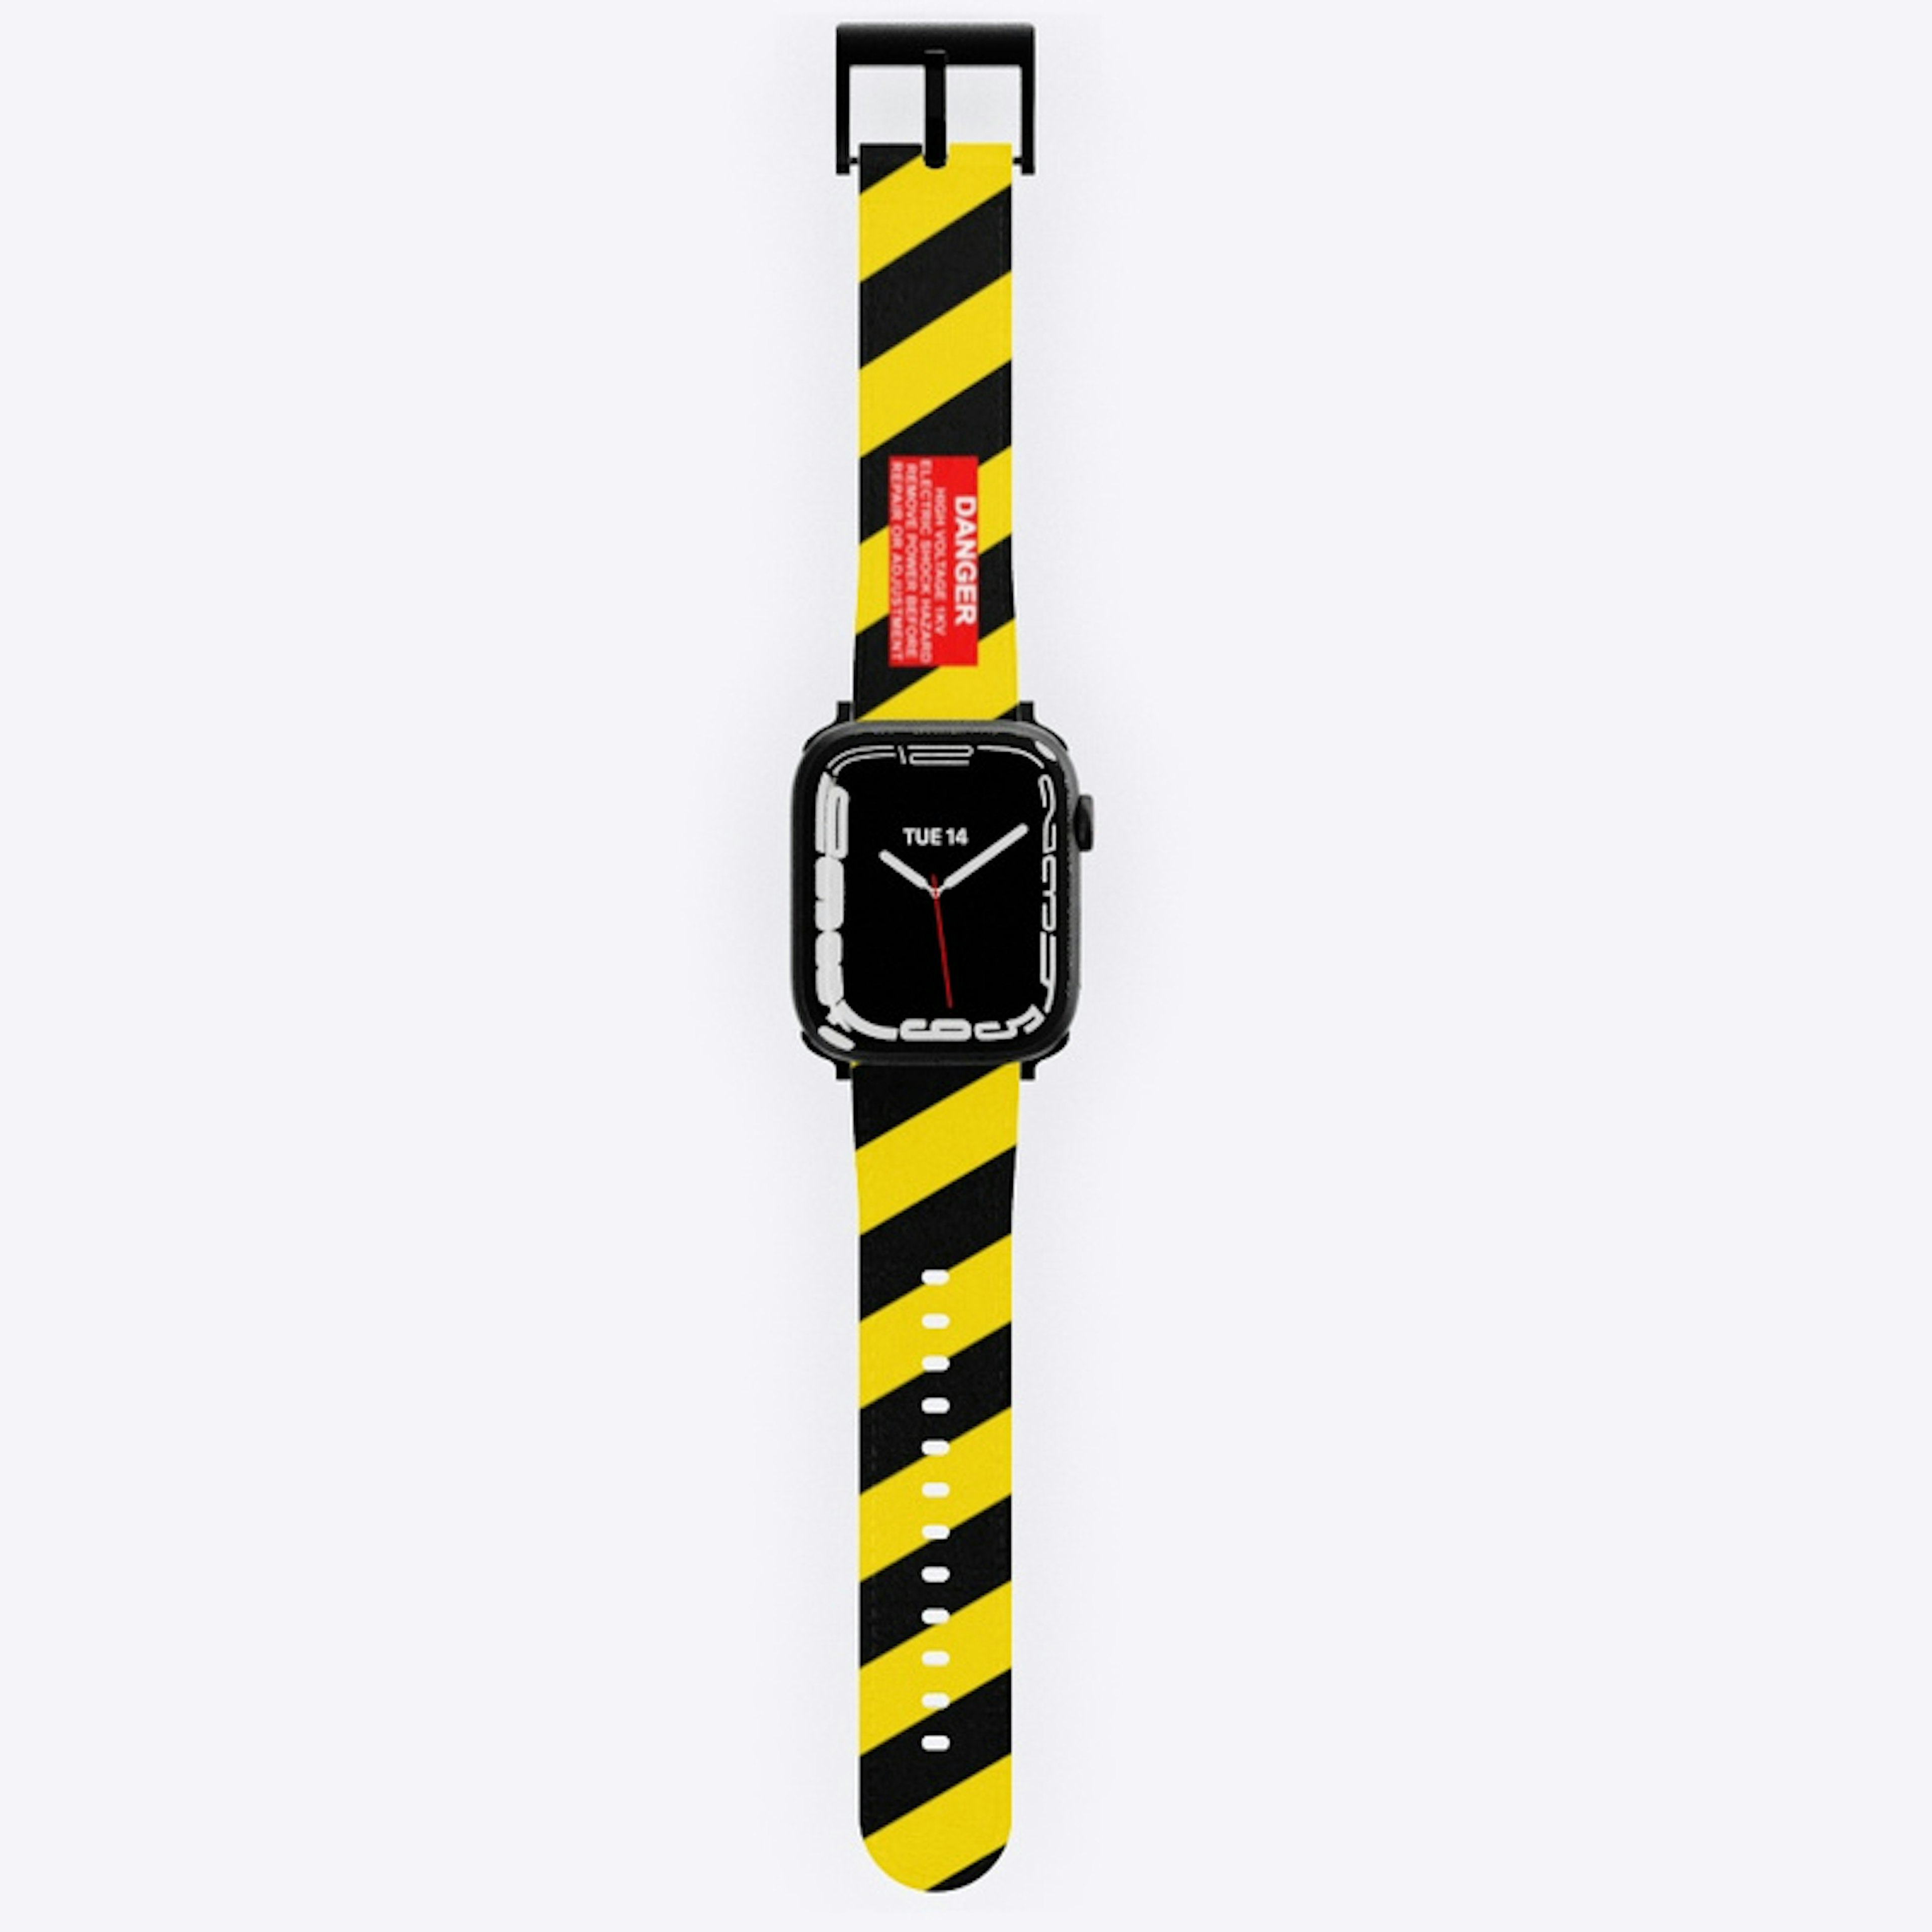 Ghost Trap inspired Apple Watch strap